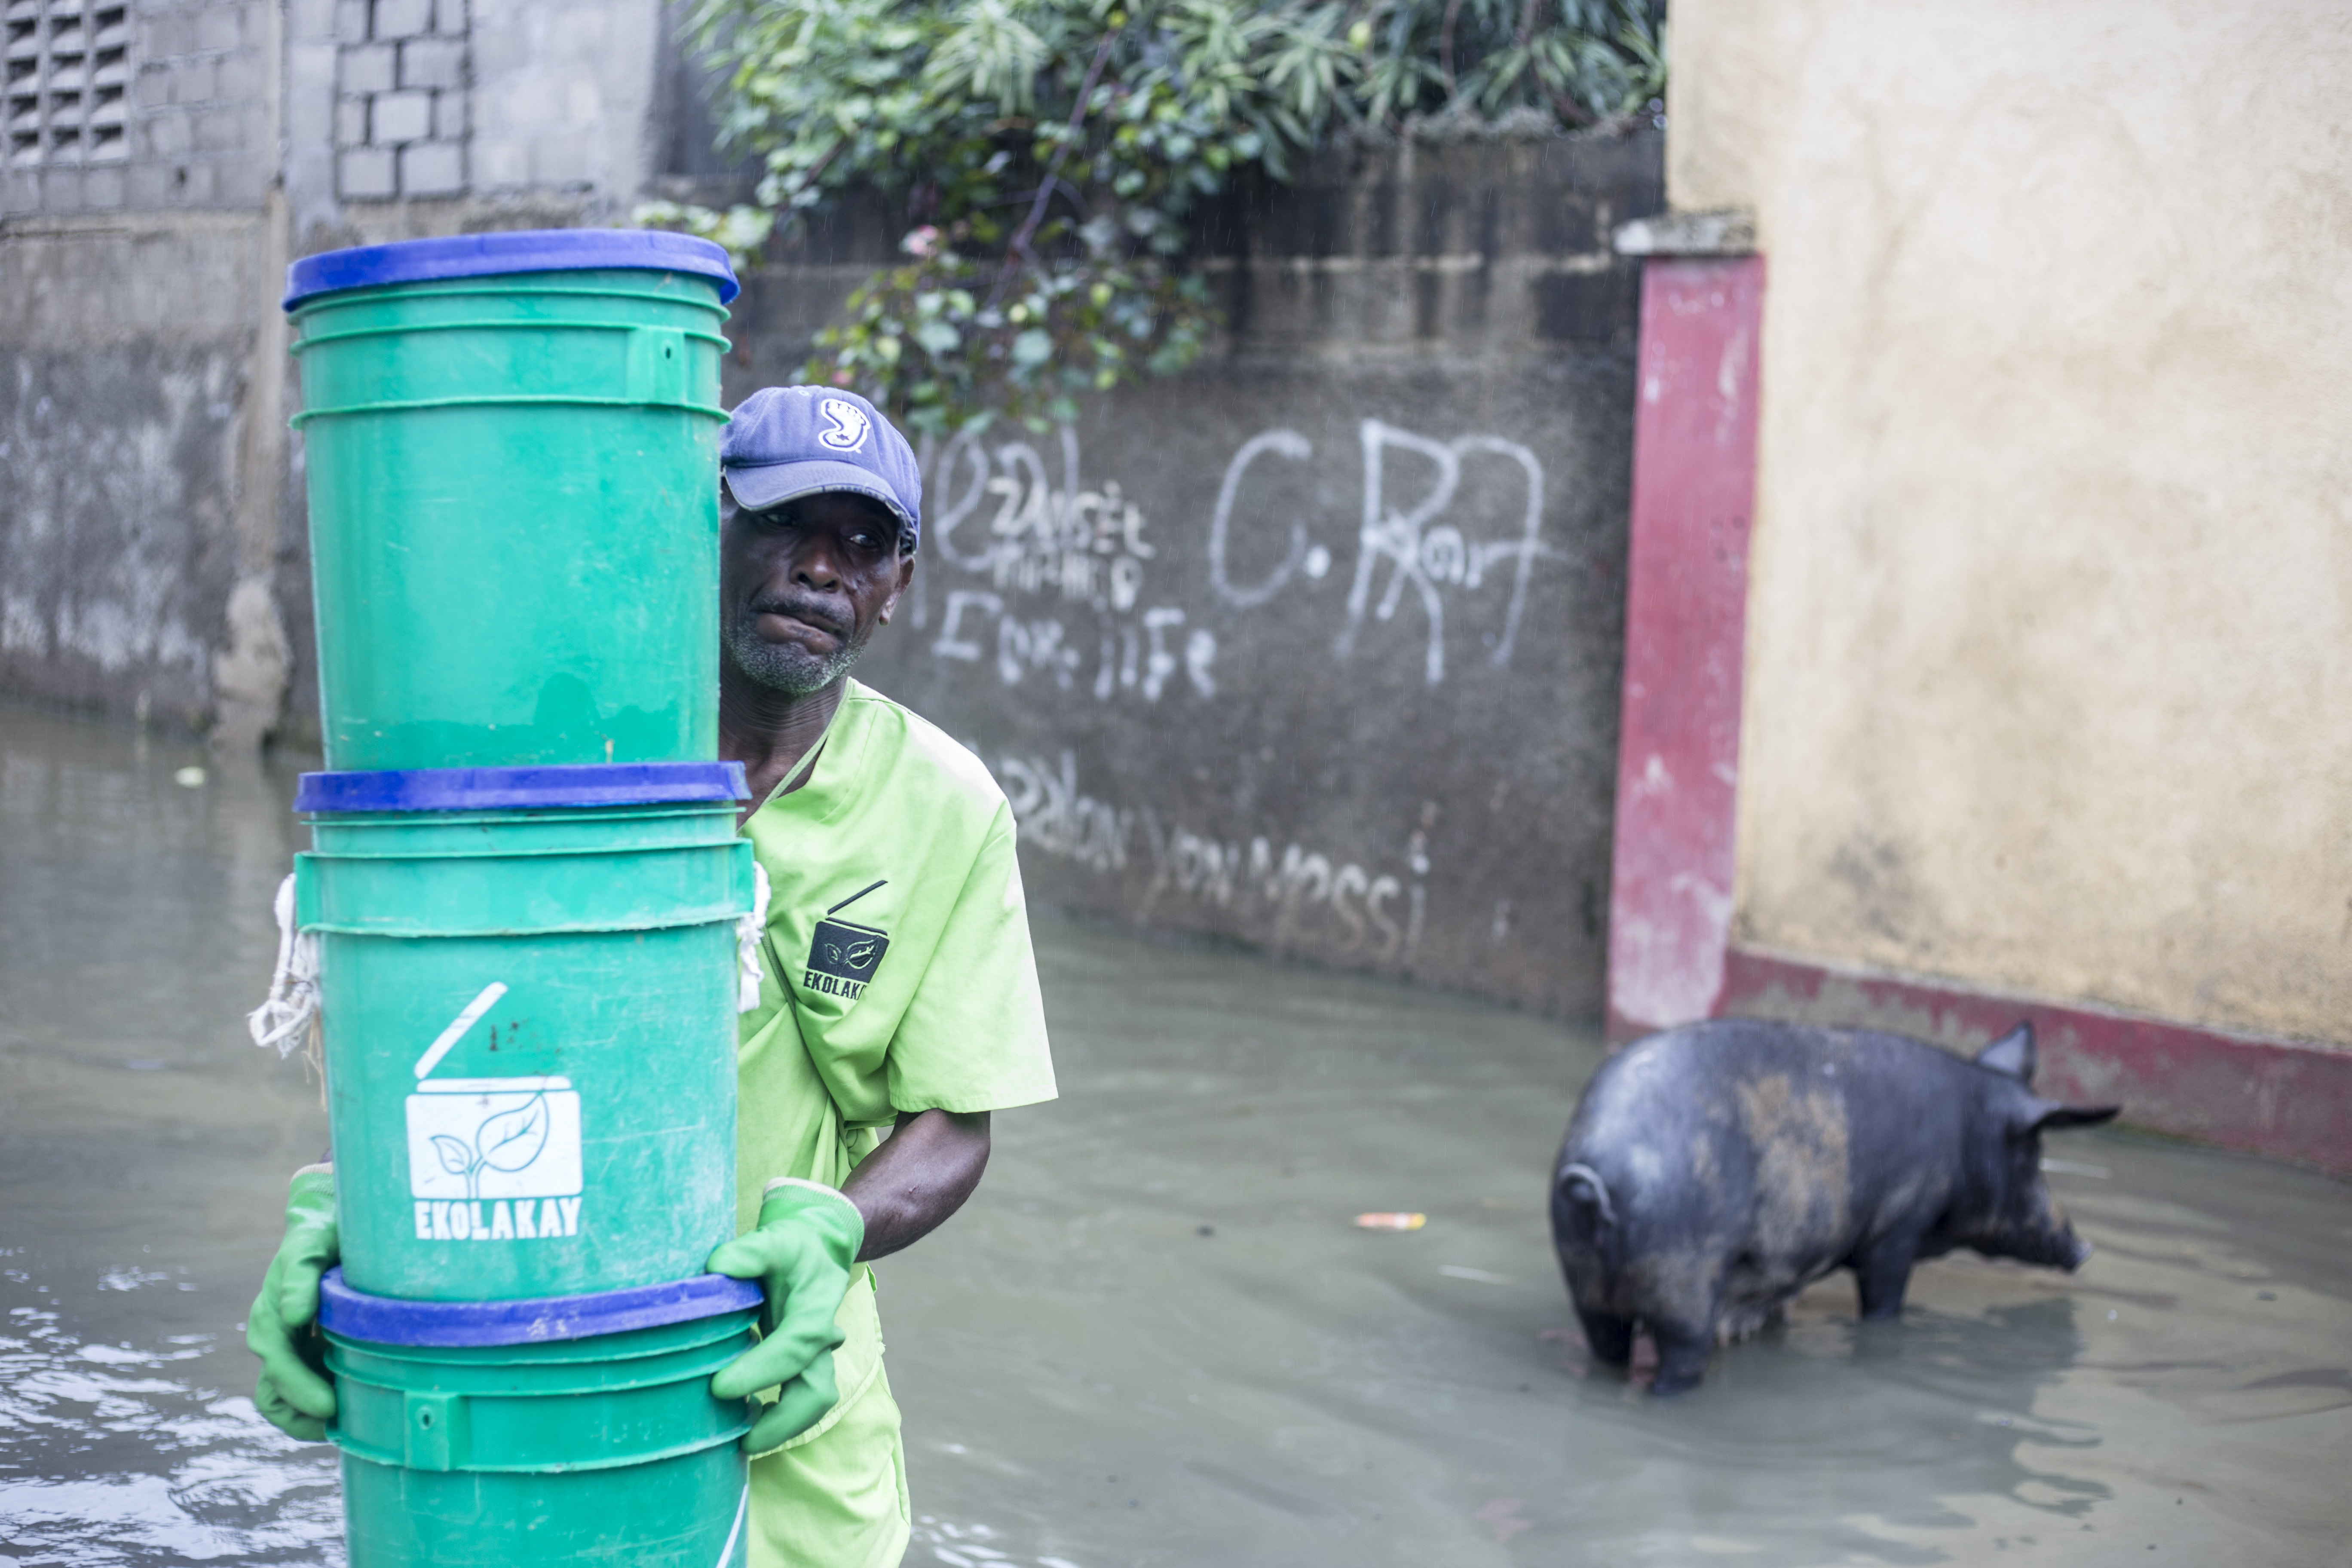 Despite flooded streets, an EkoLakay worker picks up full buckets to take for composting. Photo: Caleb Alcenat/Labelimage for Project #WasteNot (Creative Commons).